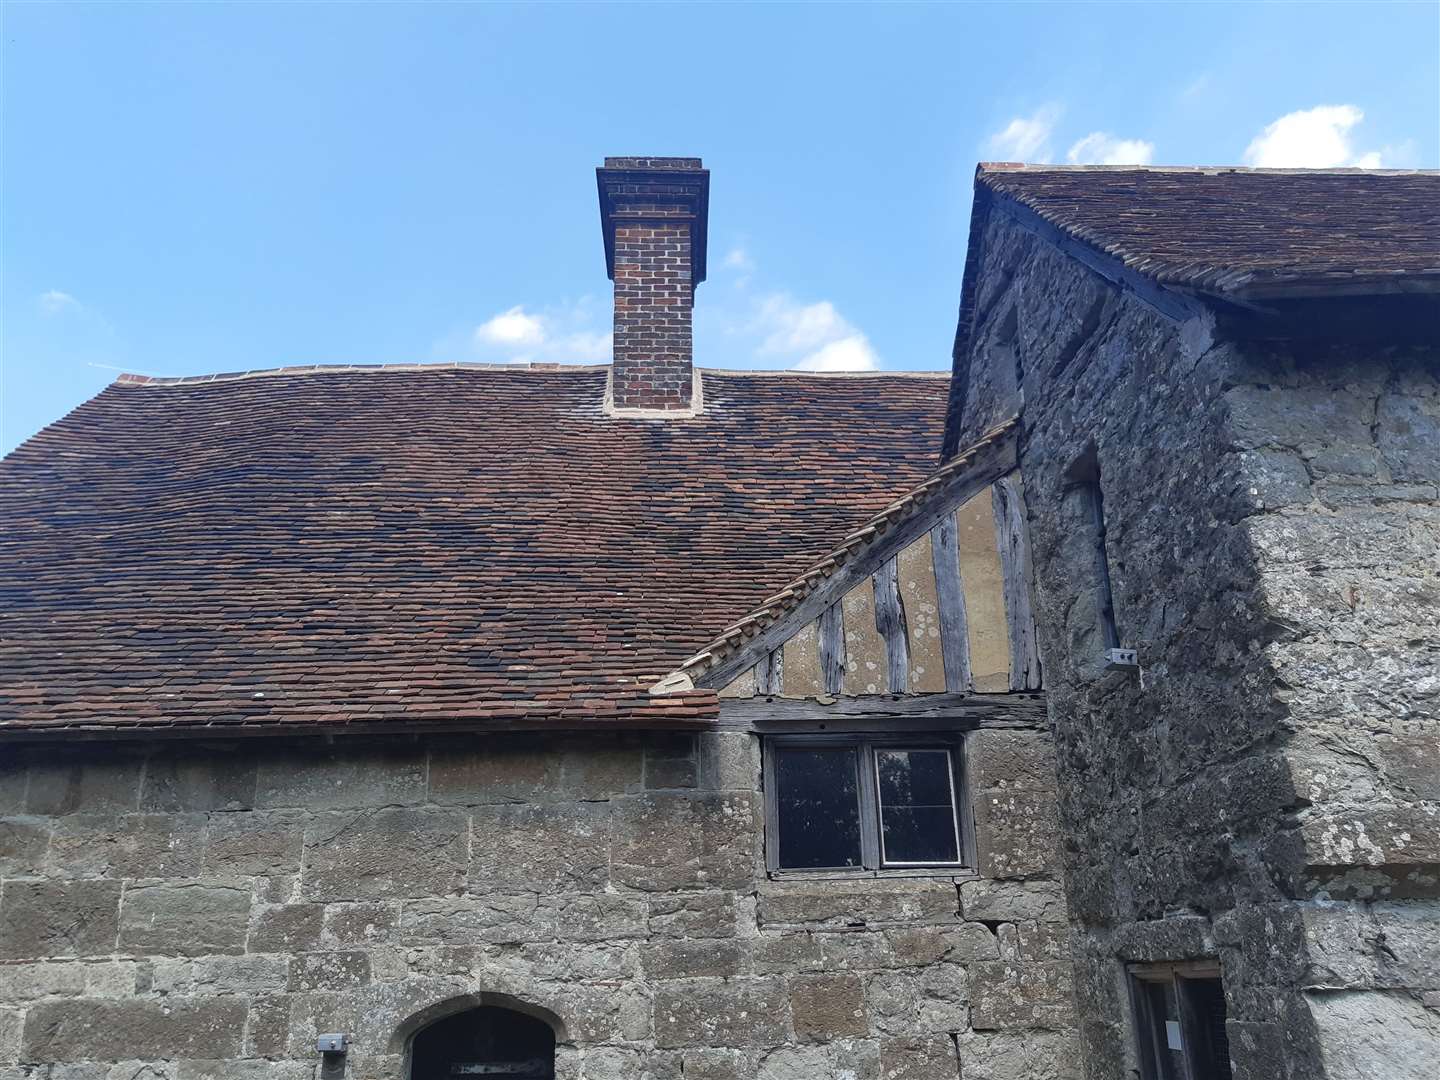 The roof of the old house has been repaired